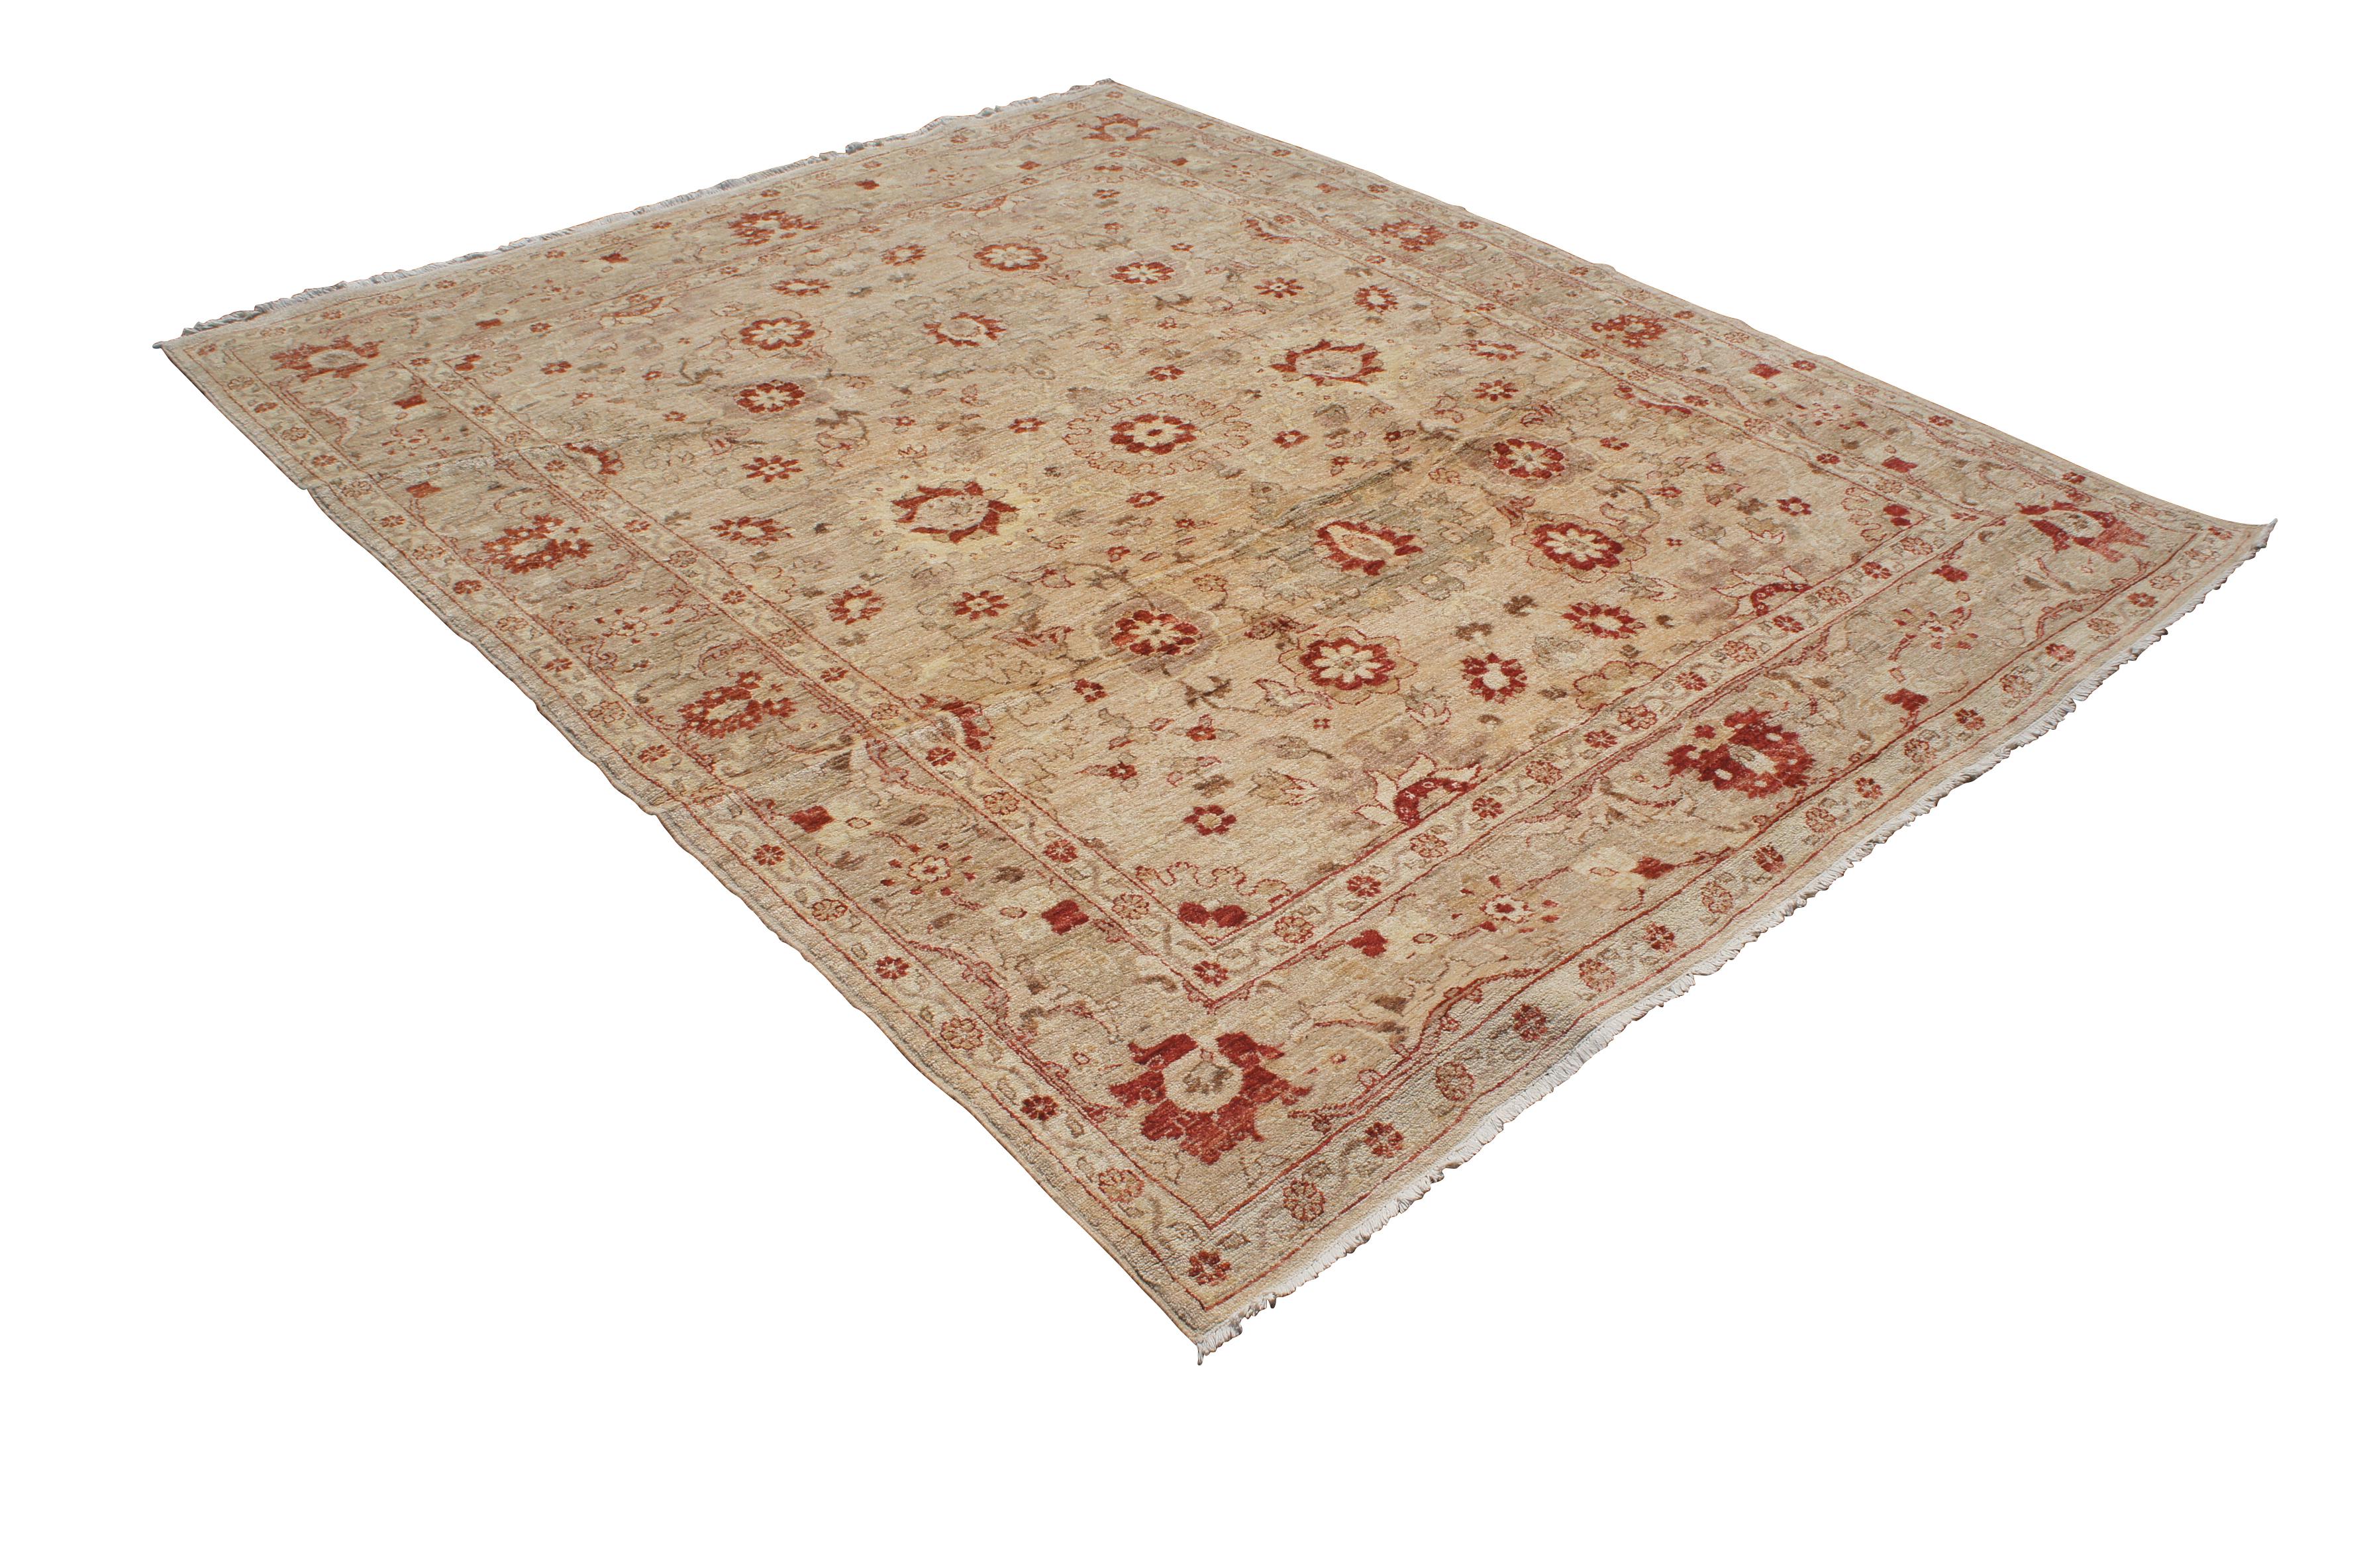 Hand Woven Pakistani Peshawar Red & Beige Floral Carpet Wool Area Rug 8' x 10' In Good Condition For Sale In Dayton, OH